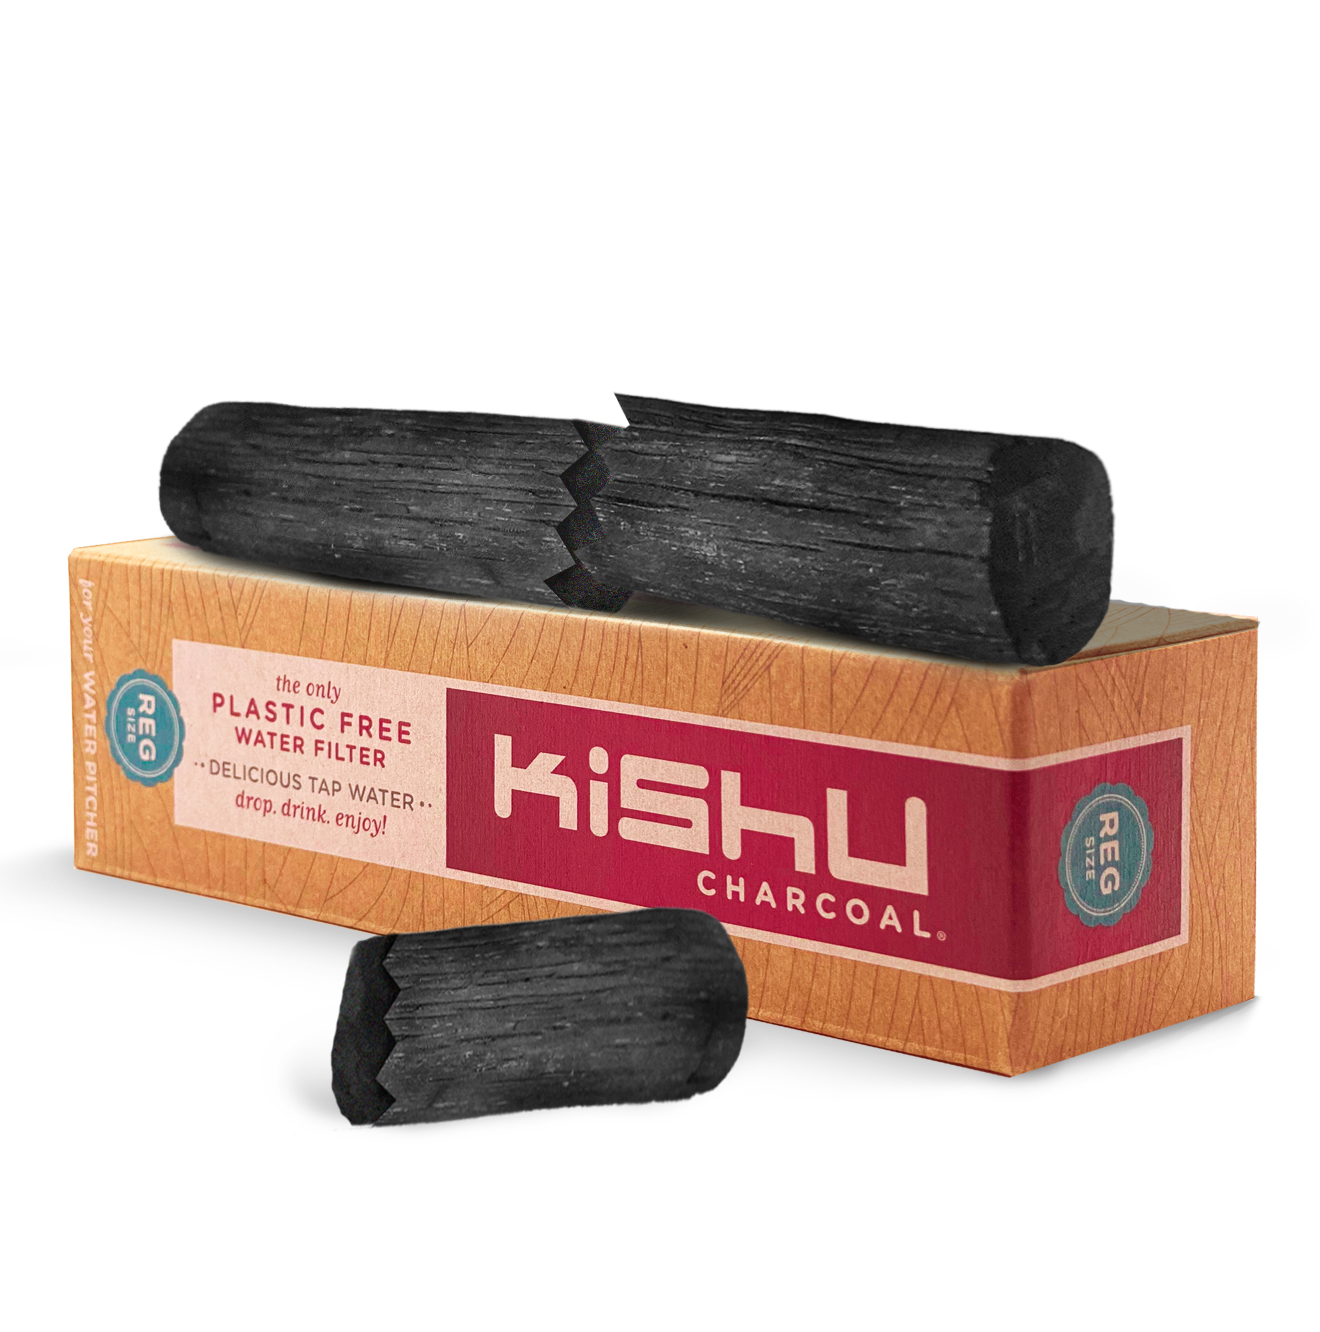 Kishu Charcoal Regular - 2 Half Pieces The ONLY CERTIFIED AND TESTED activated charcoal